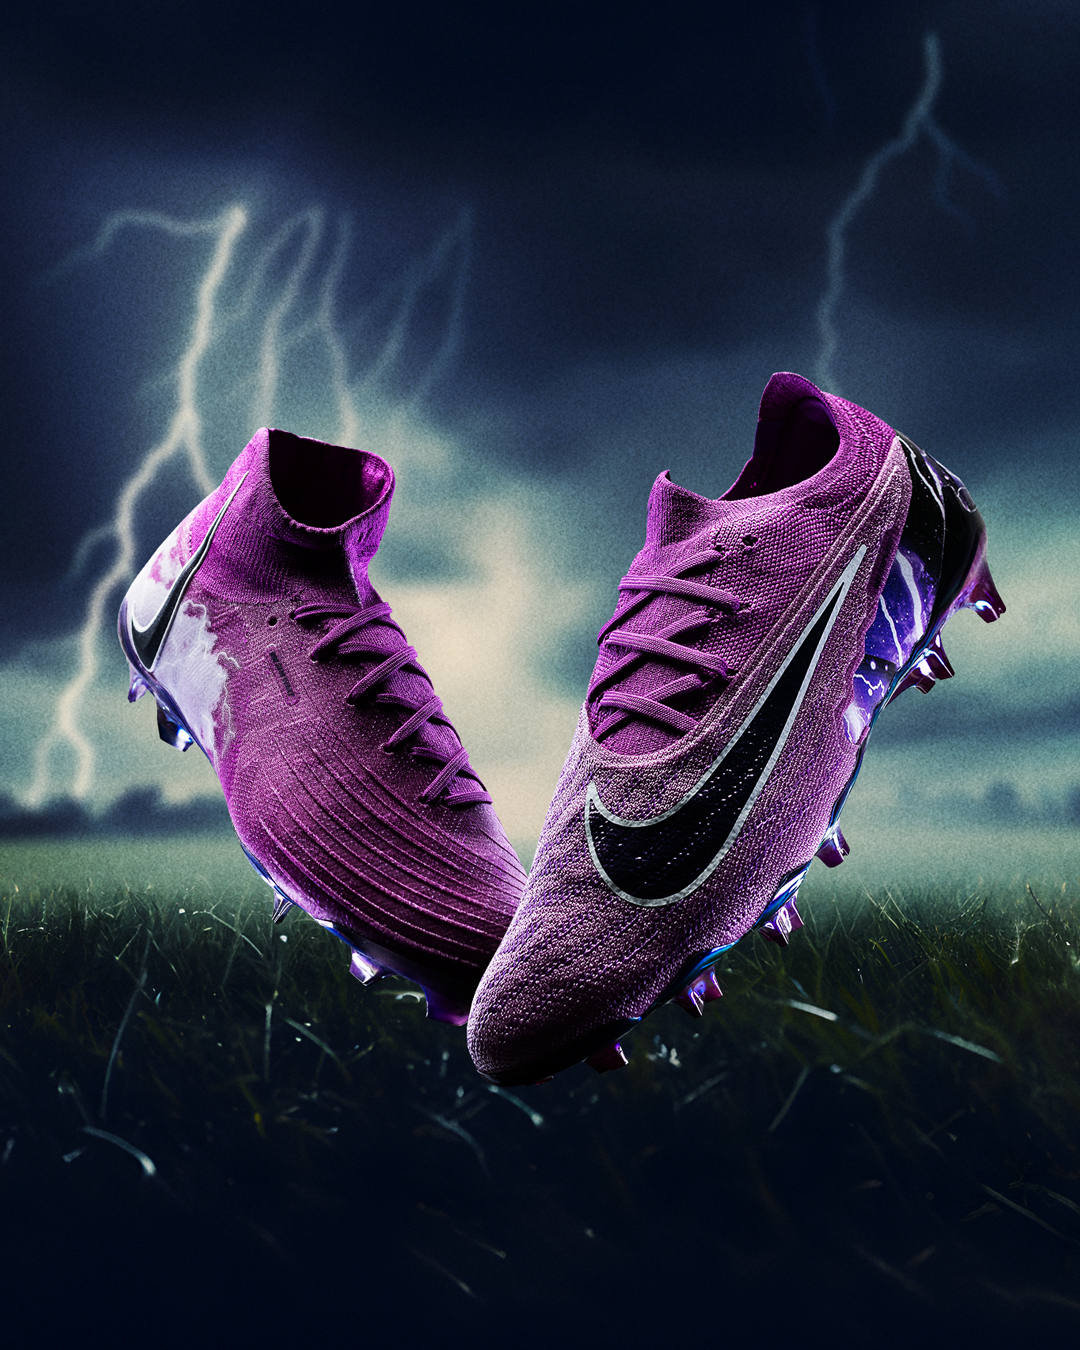 Special Nike Phantom Thunder Boots Collection Revealed - Footy Headlines